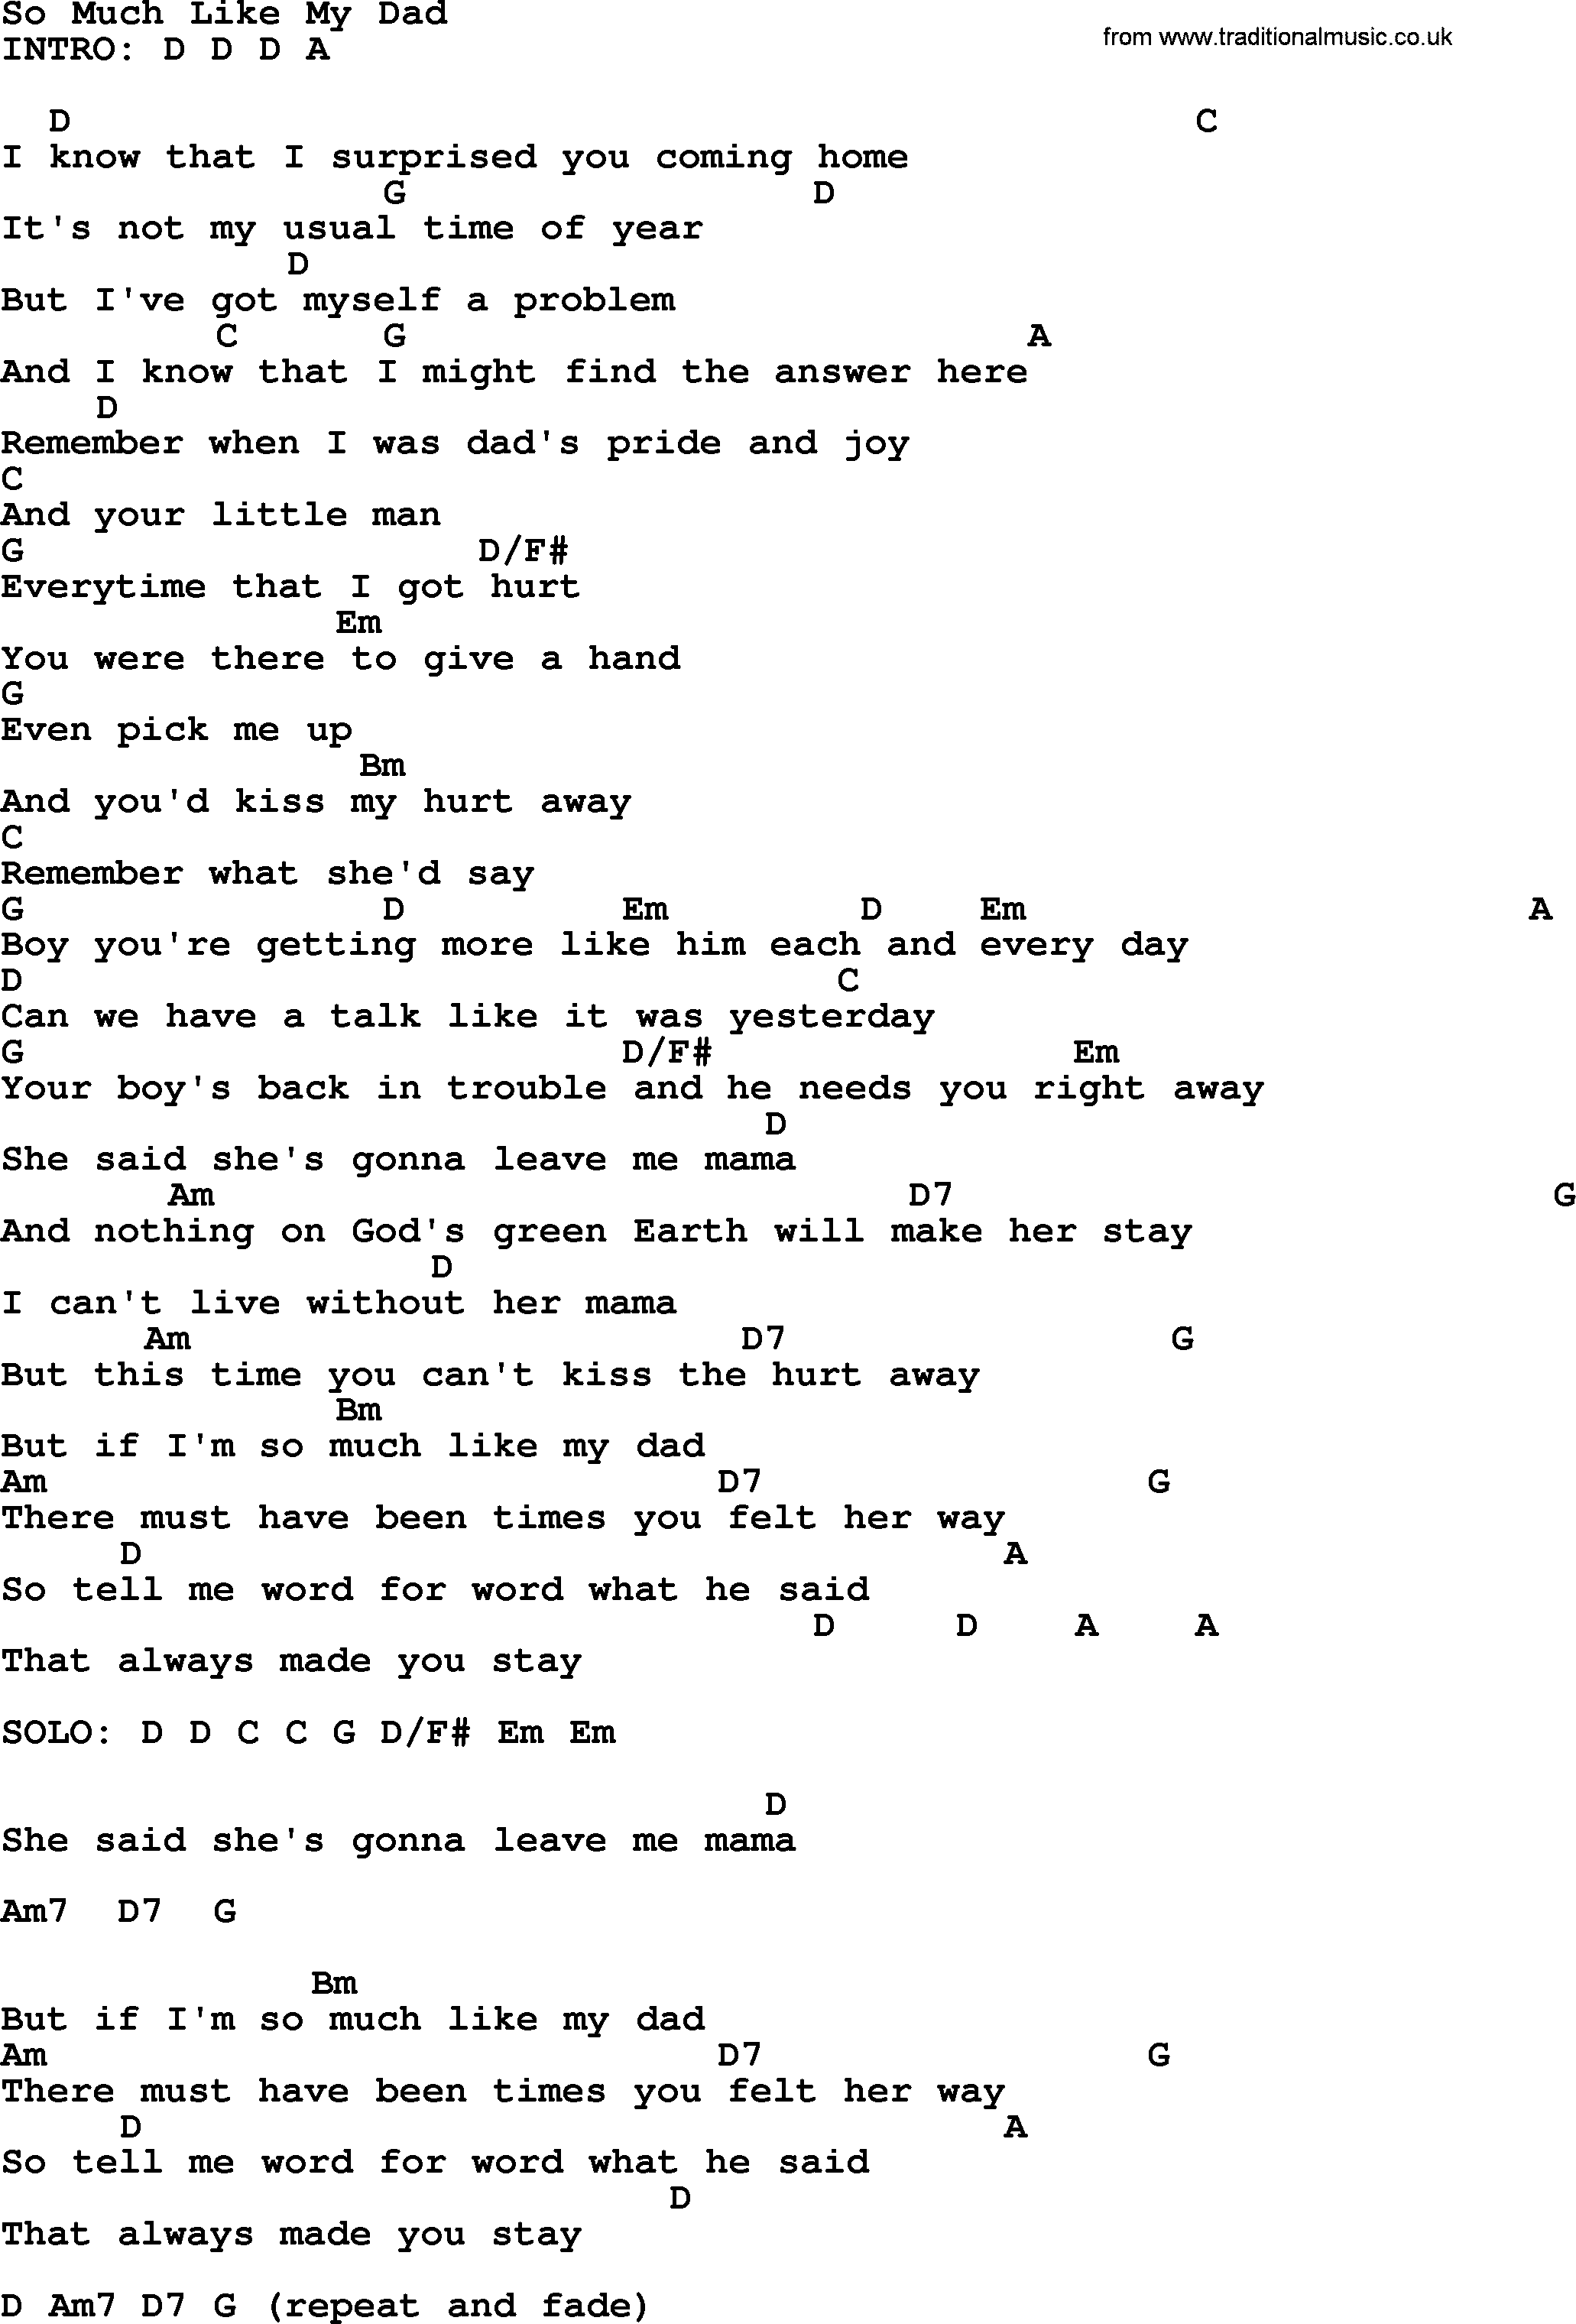 George Strait song: So Much Like My Dad, lyrics and chords